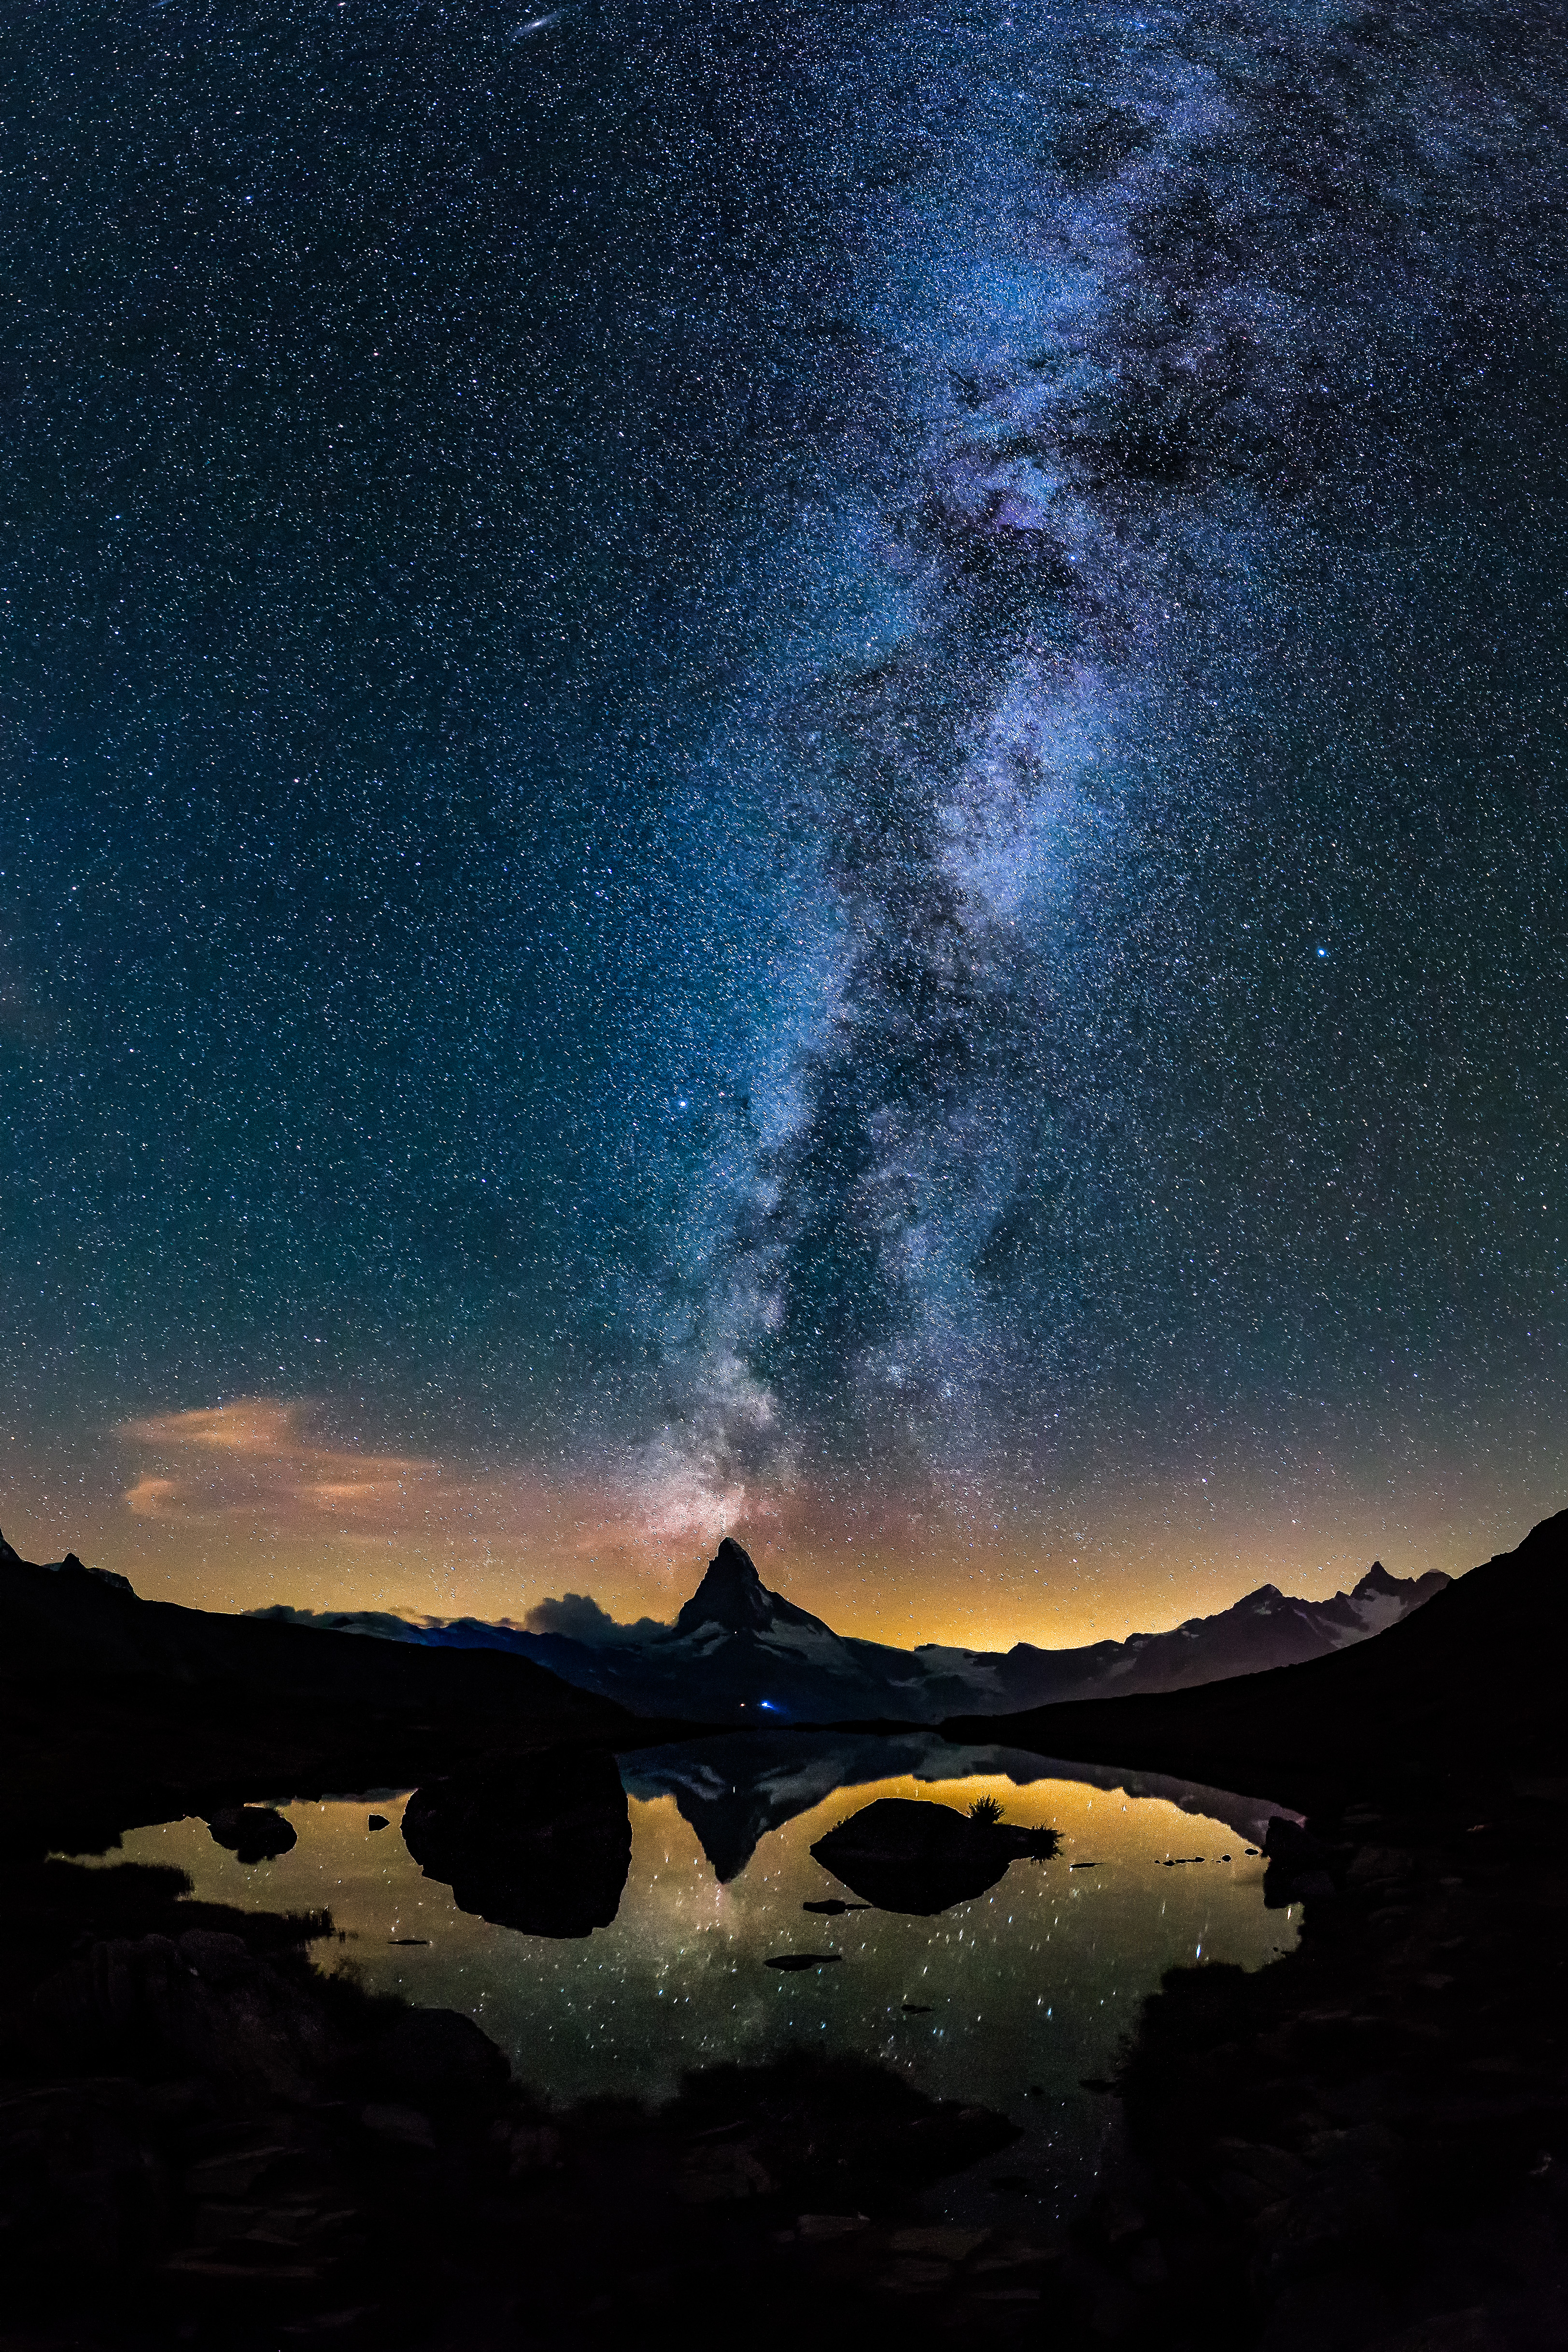 universe, nature, mountains, lake, starry sky cellphone